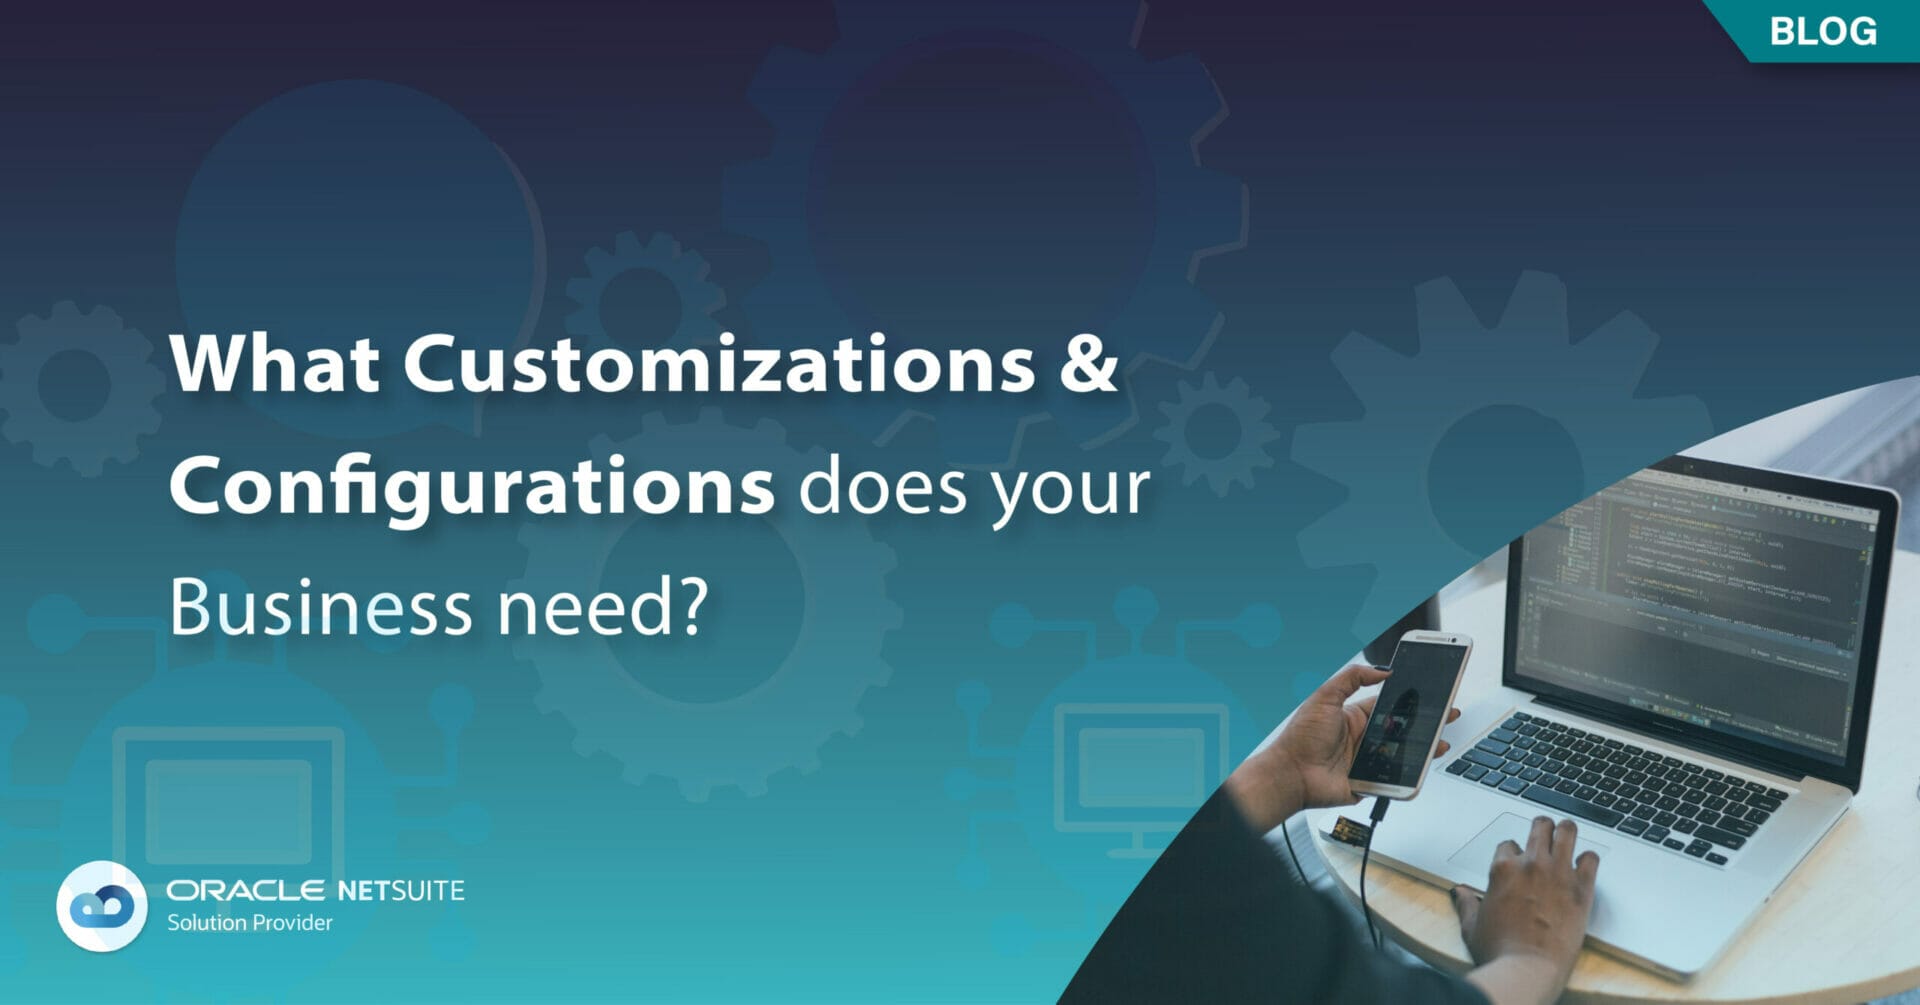 What Customizations & Configurations does your business need?